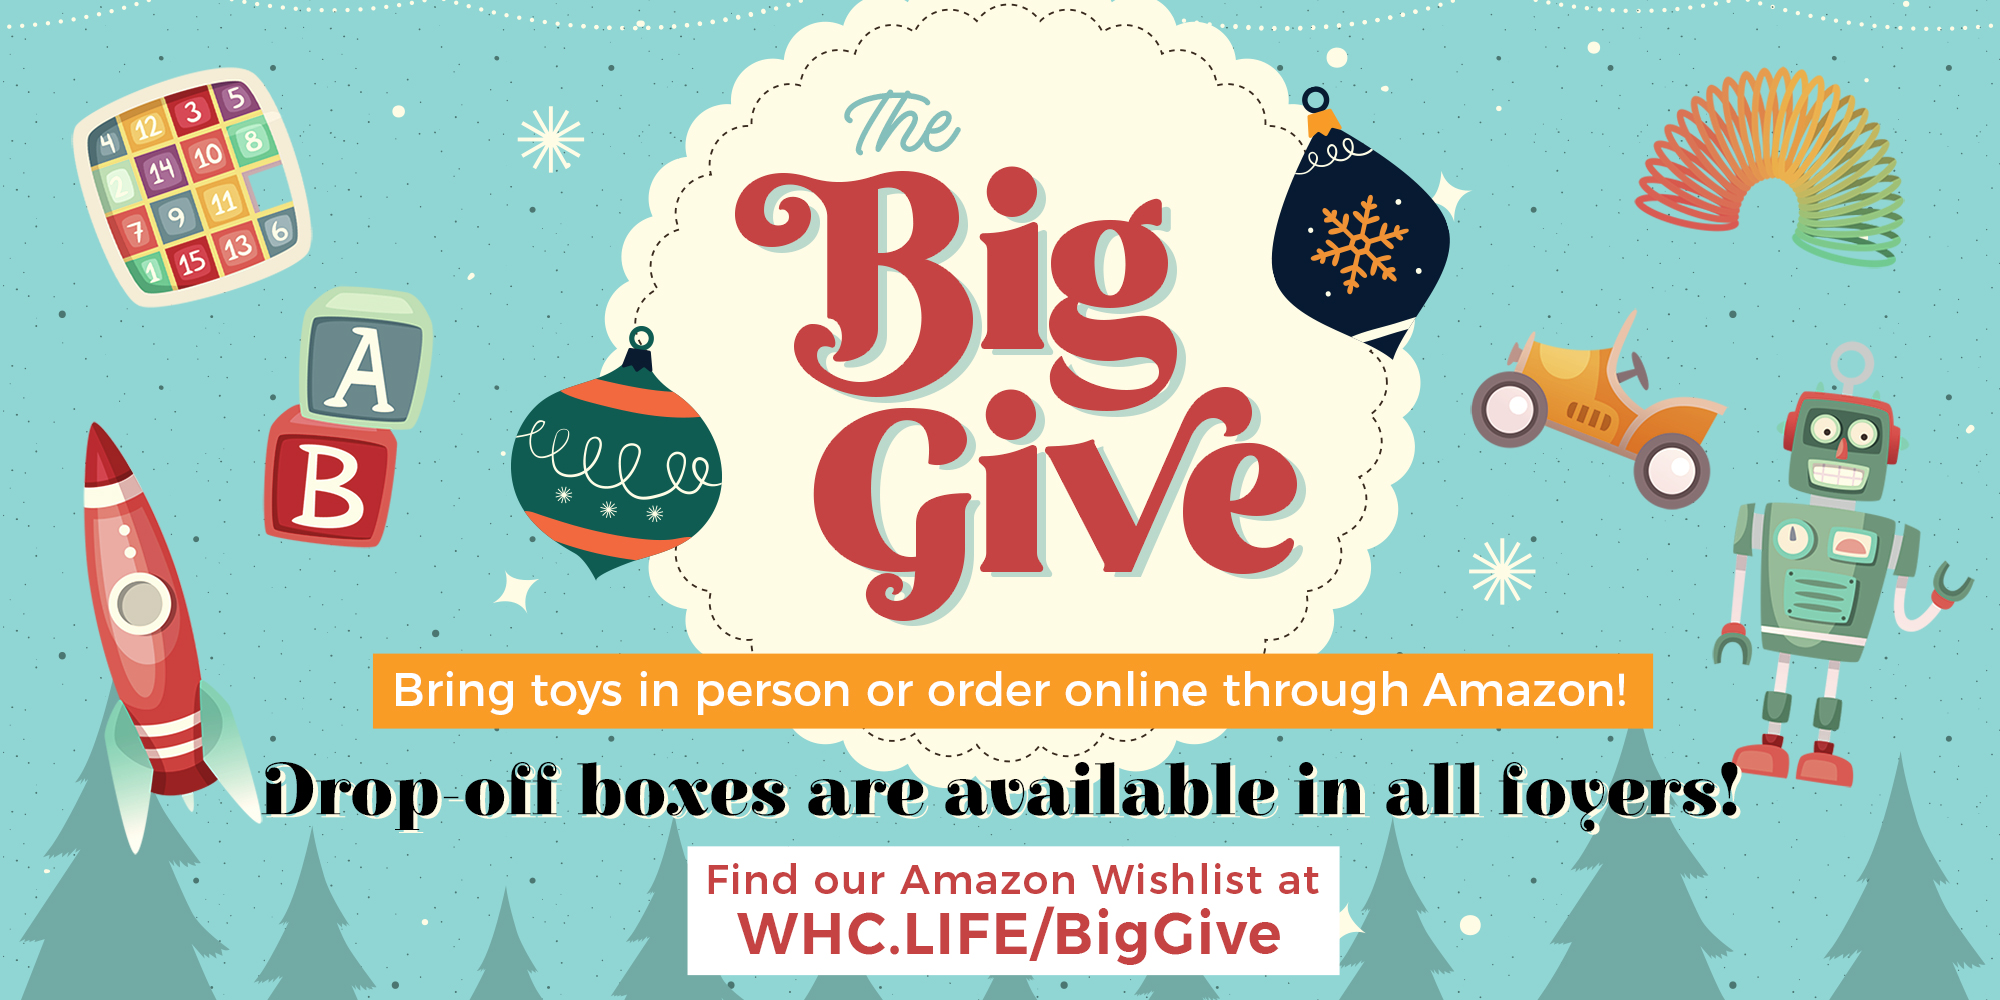 The Big Give bring toys in person or order online